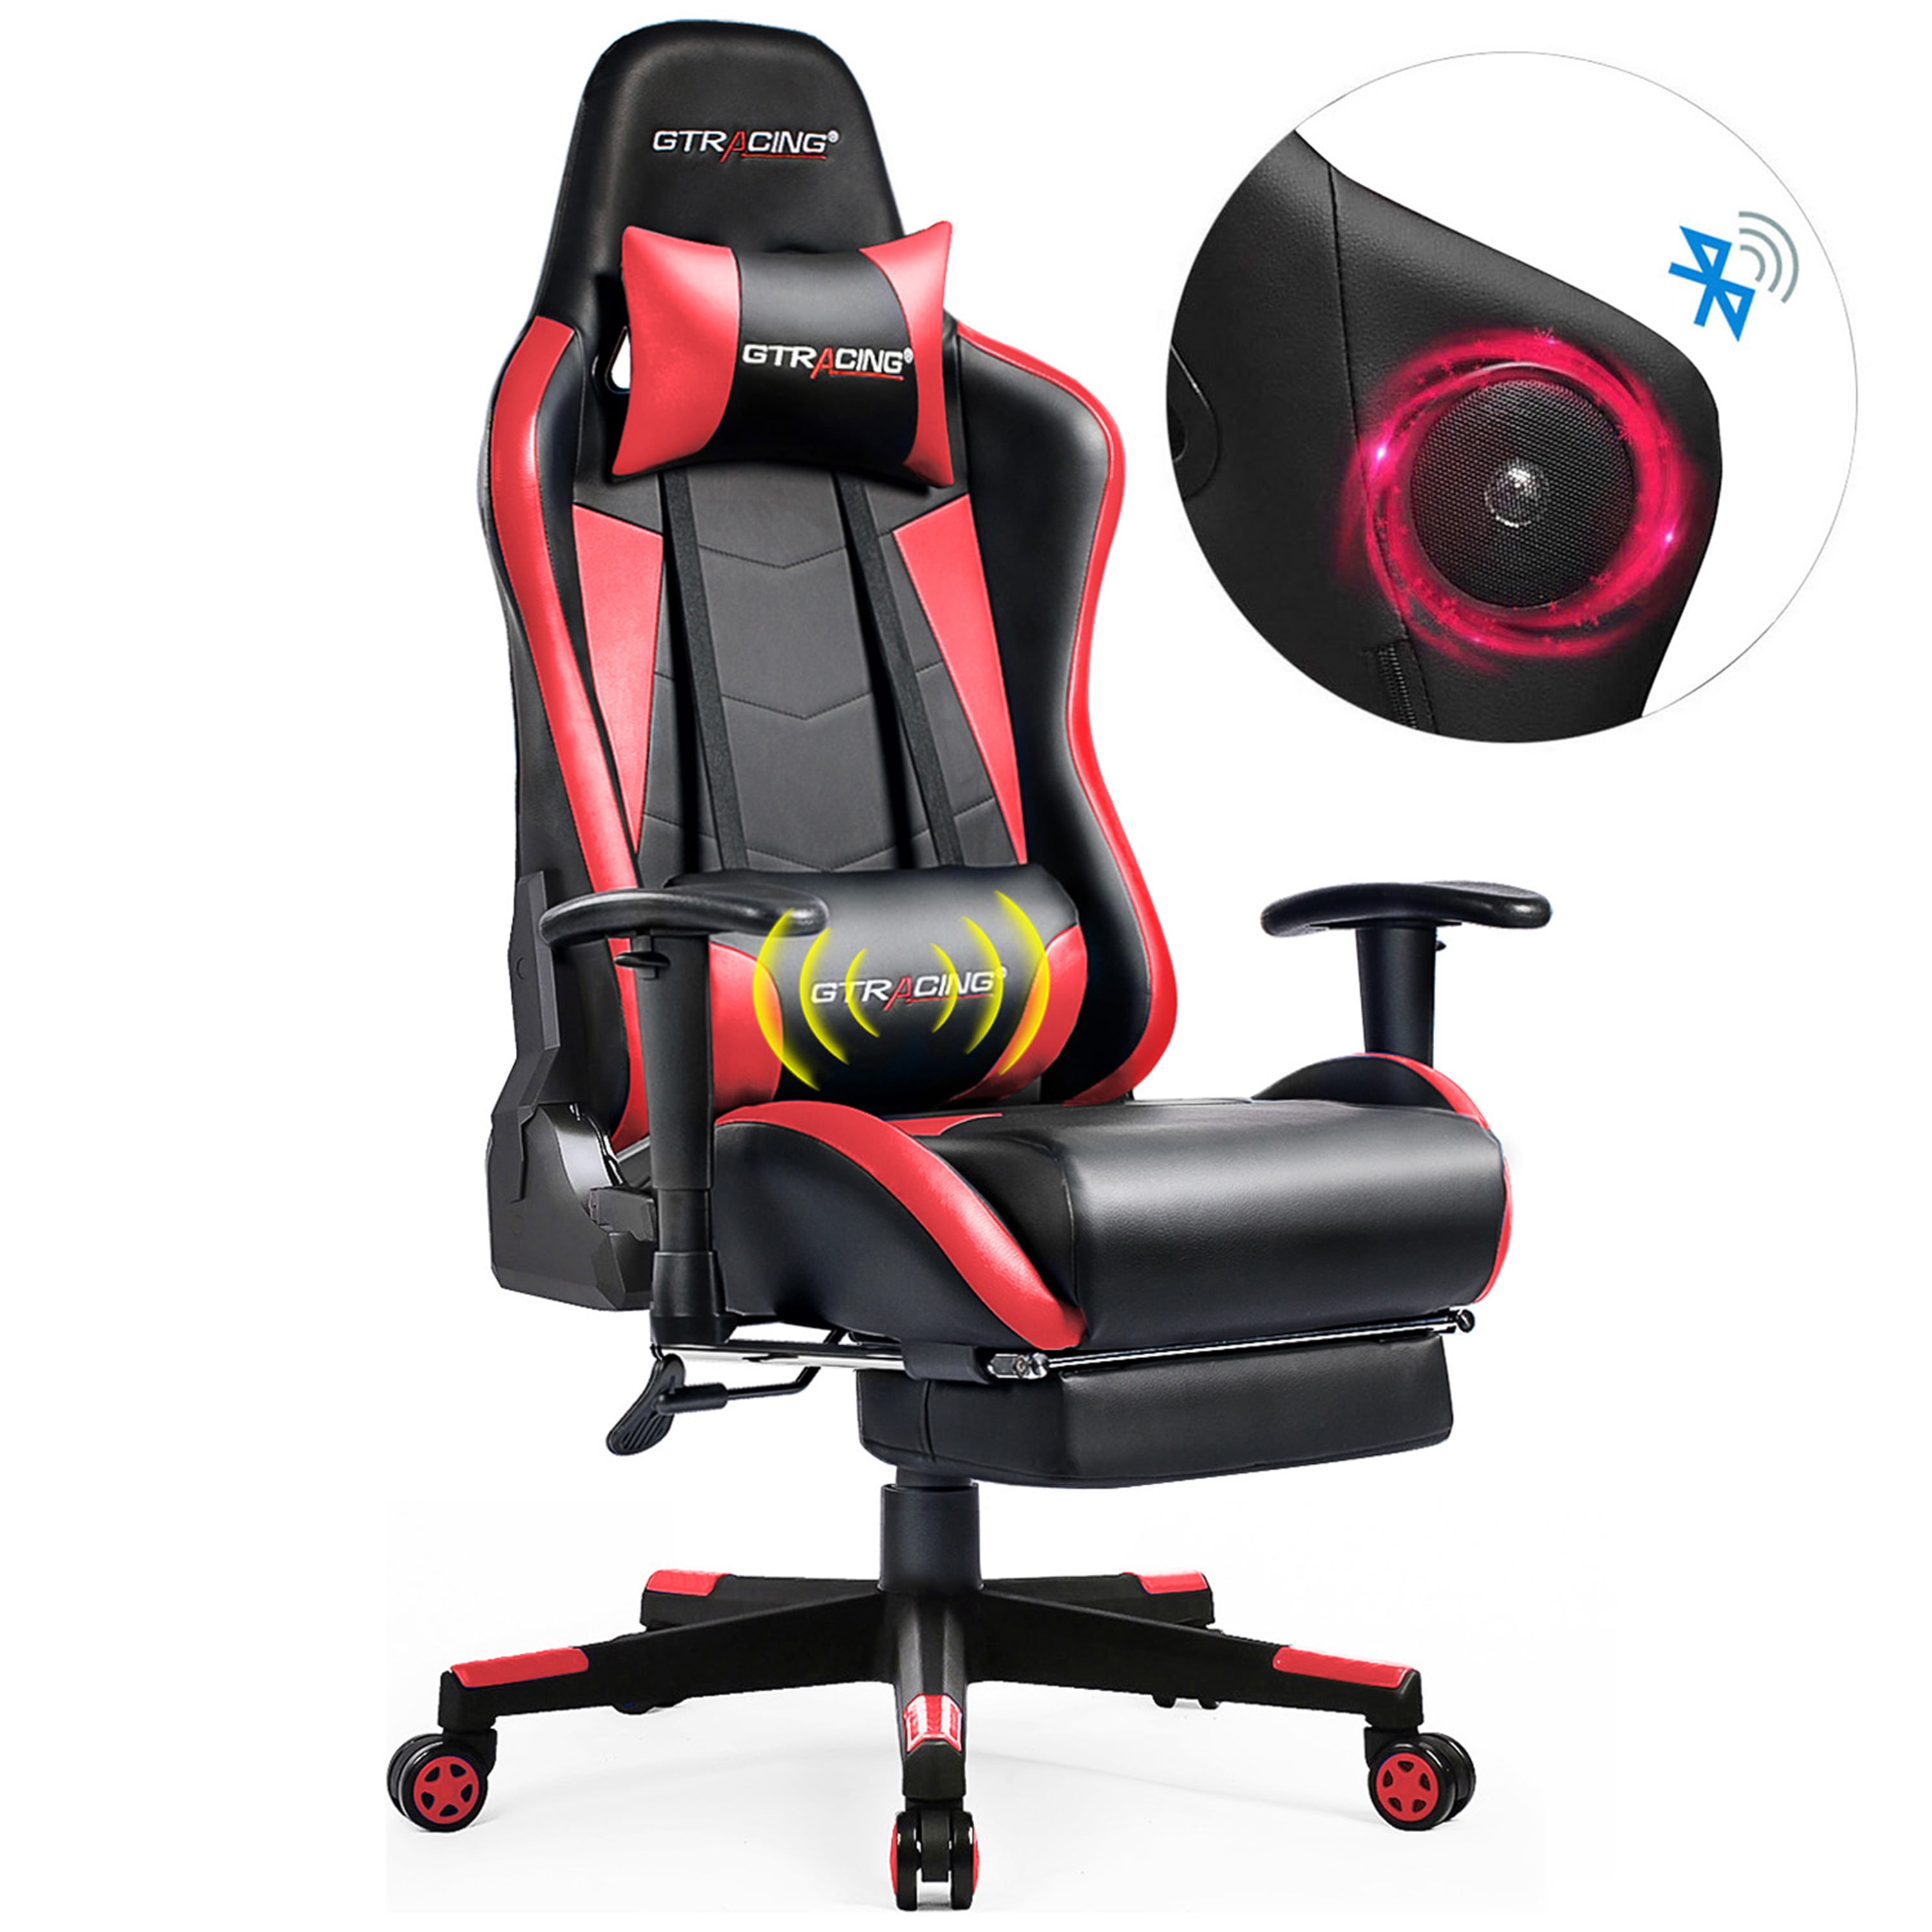 Gtracing Gaming Chair With Bluetooth Speakers Footrest Massage Music Game Chair Purple Walmart Com Walmart Com